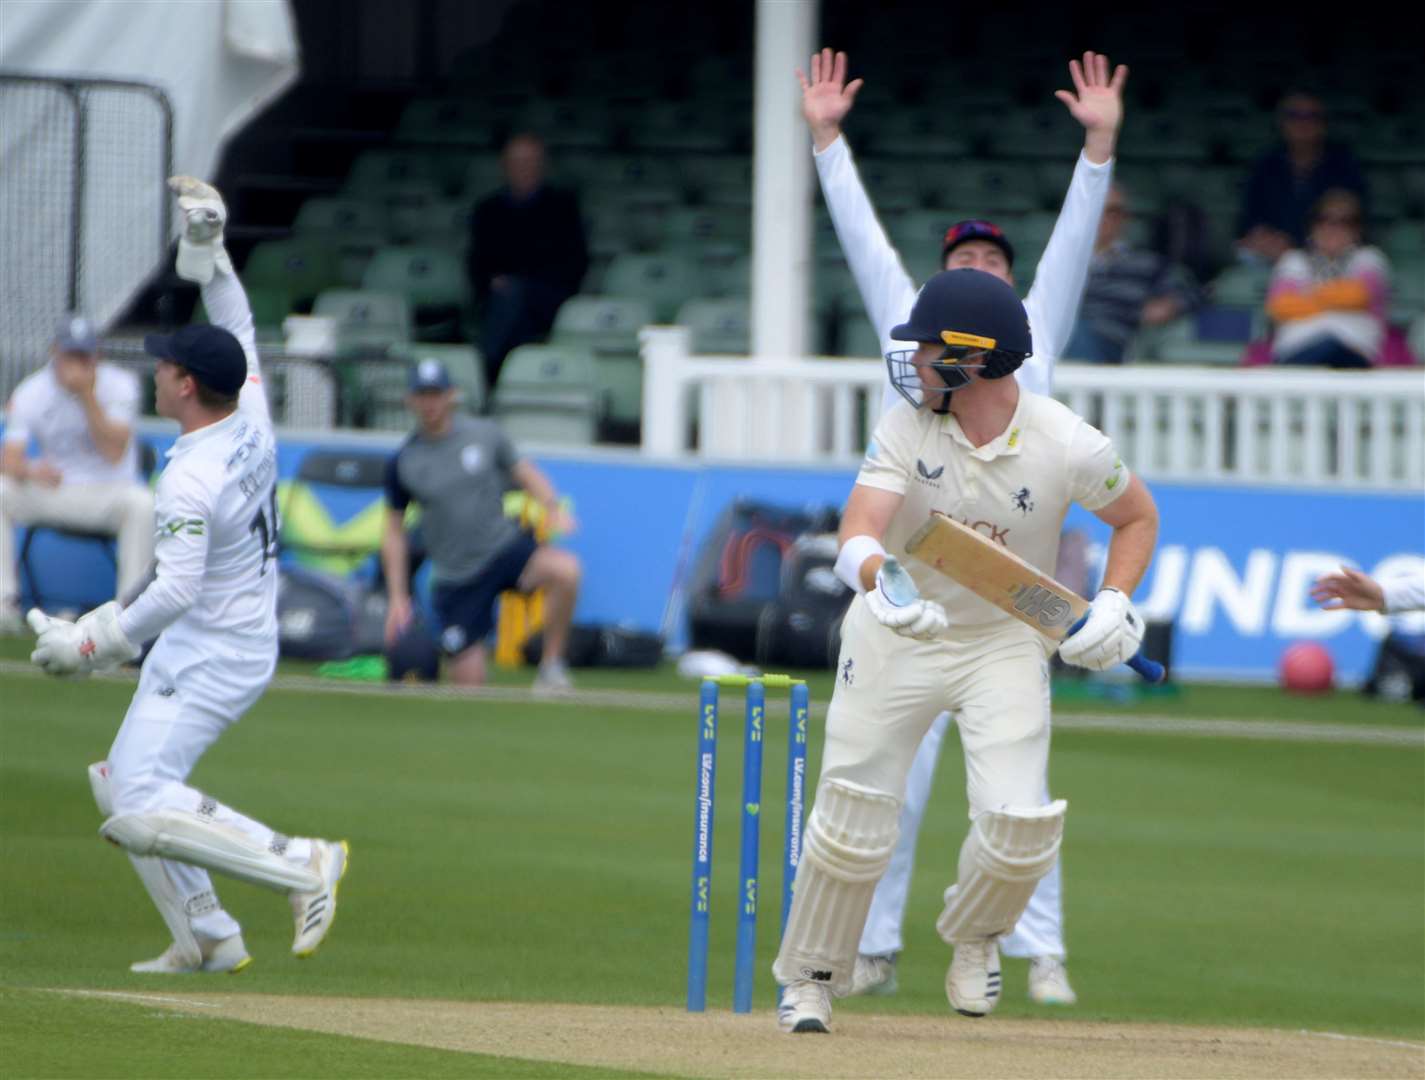 Kent opener Ben Compton survives an lbw appeal. Picture: Barry Goodwin